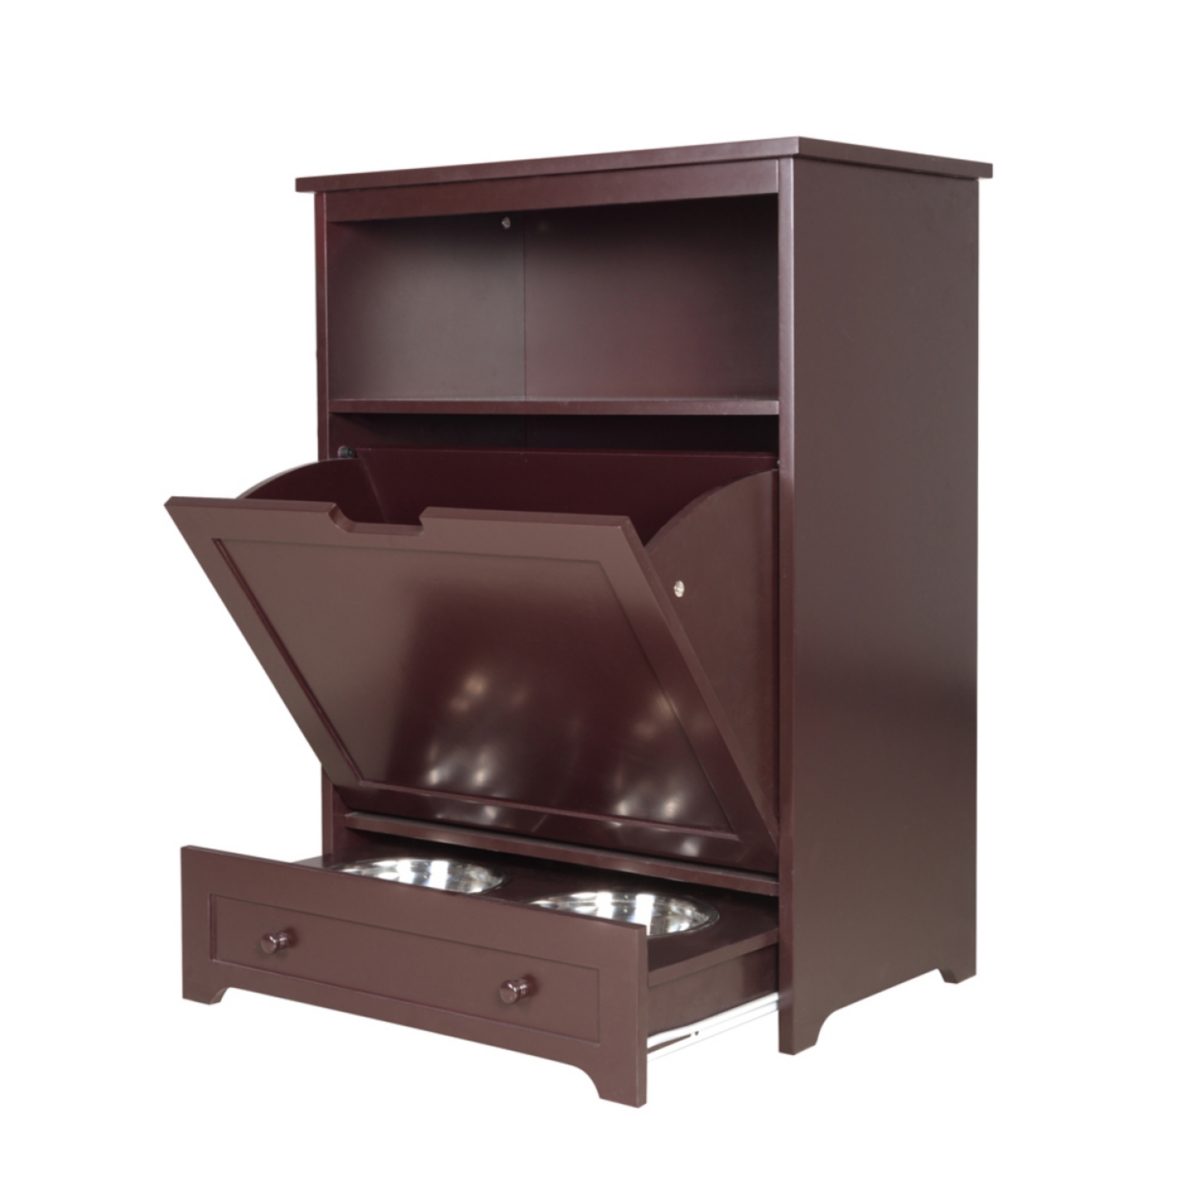 Mdf Pet Feeder Station with Storage and Stainless Bowl - Brown